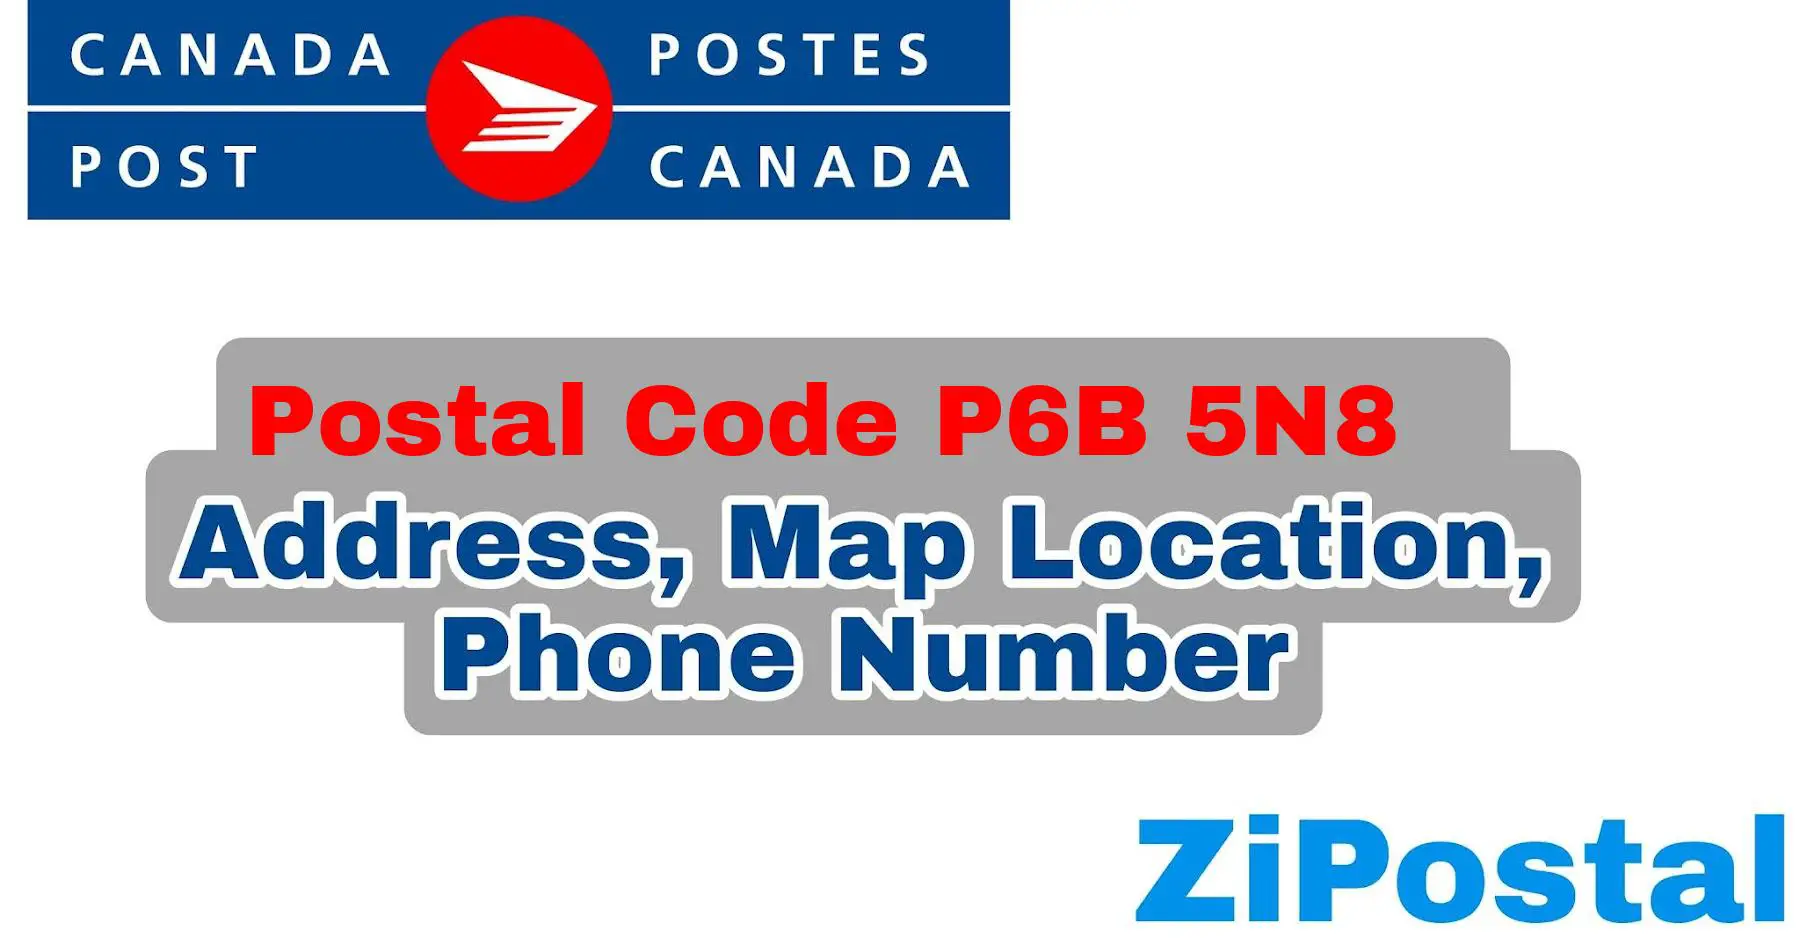 Postal Code P6B 5N8 Address Map Location and Phone Number